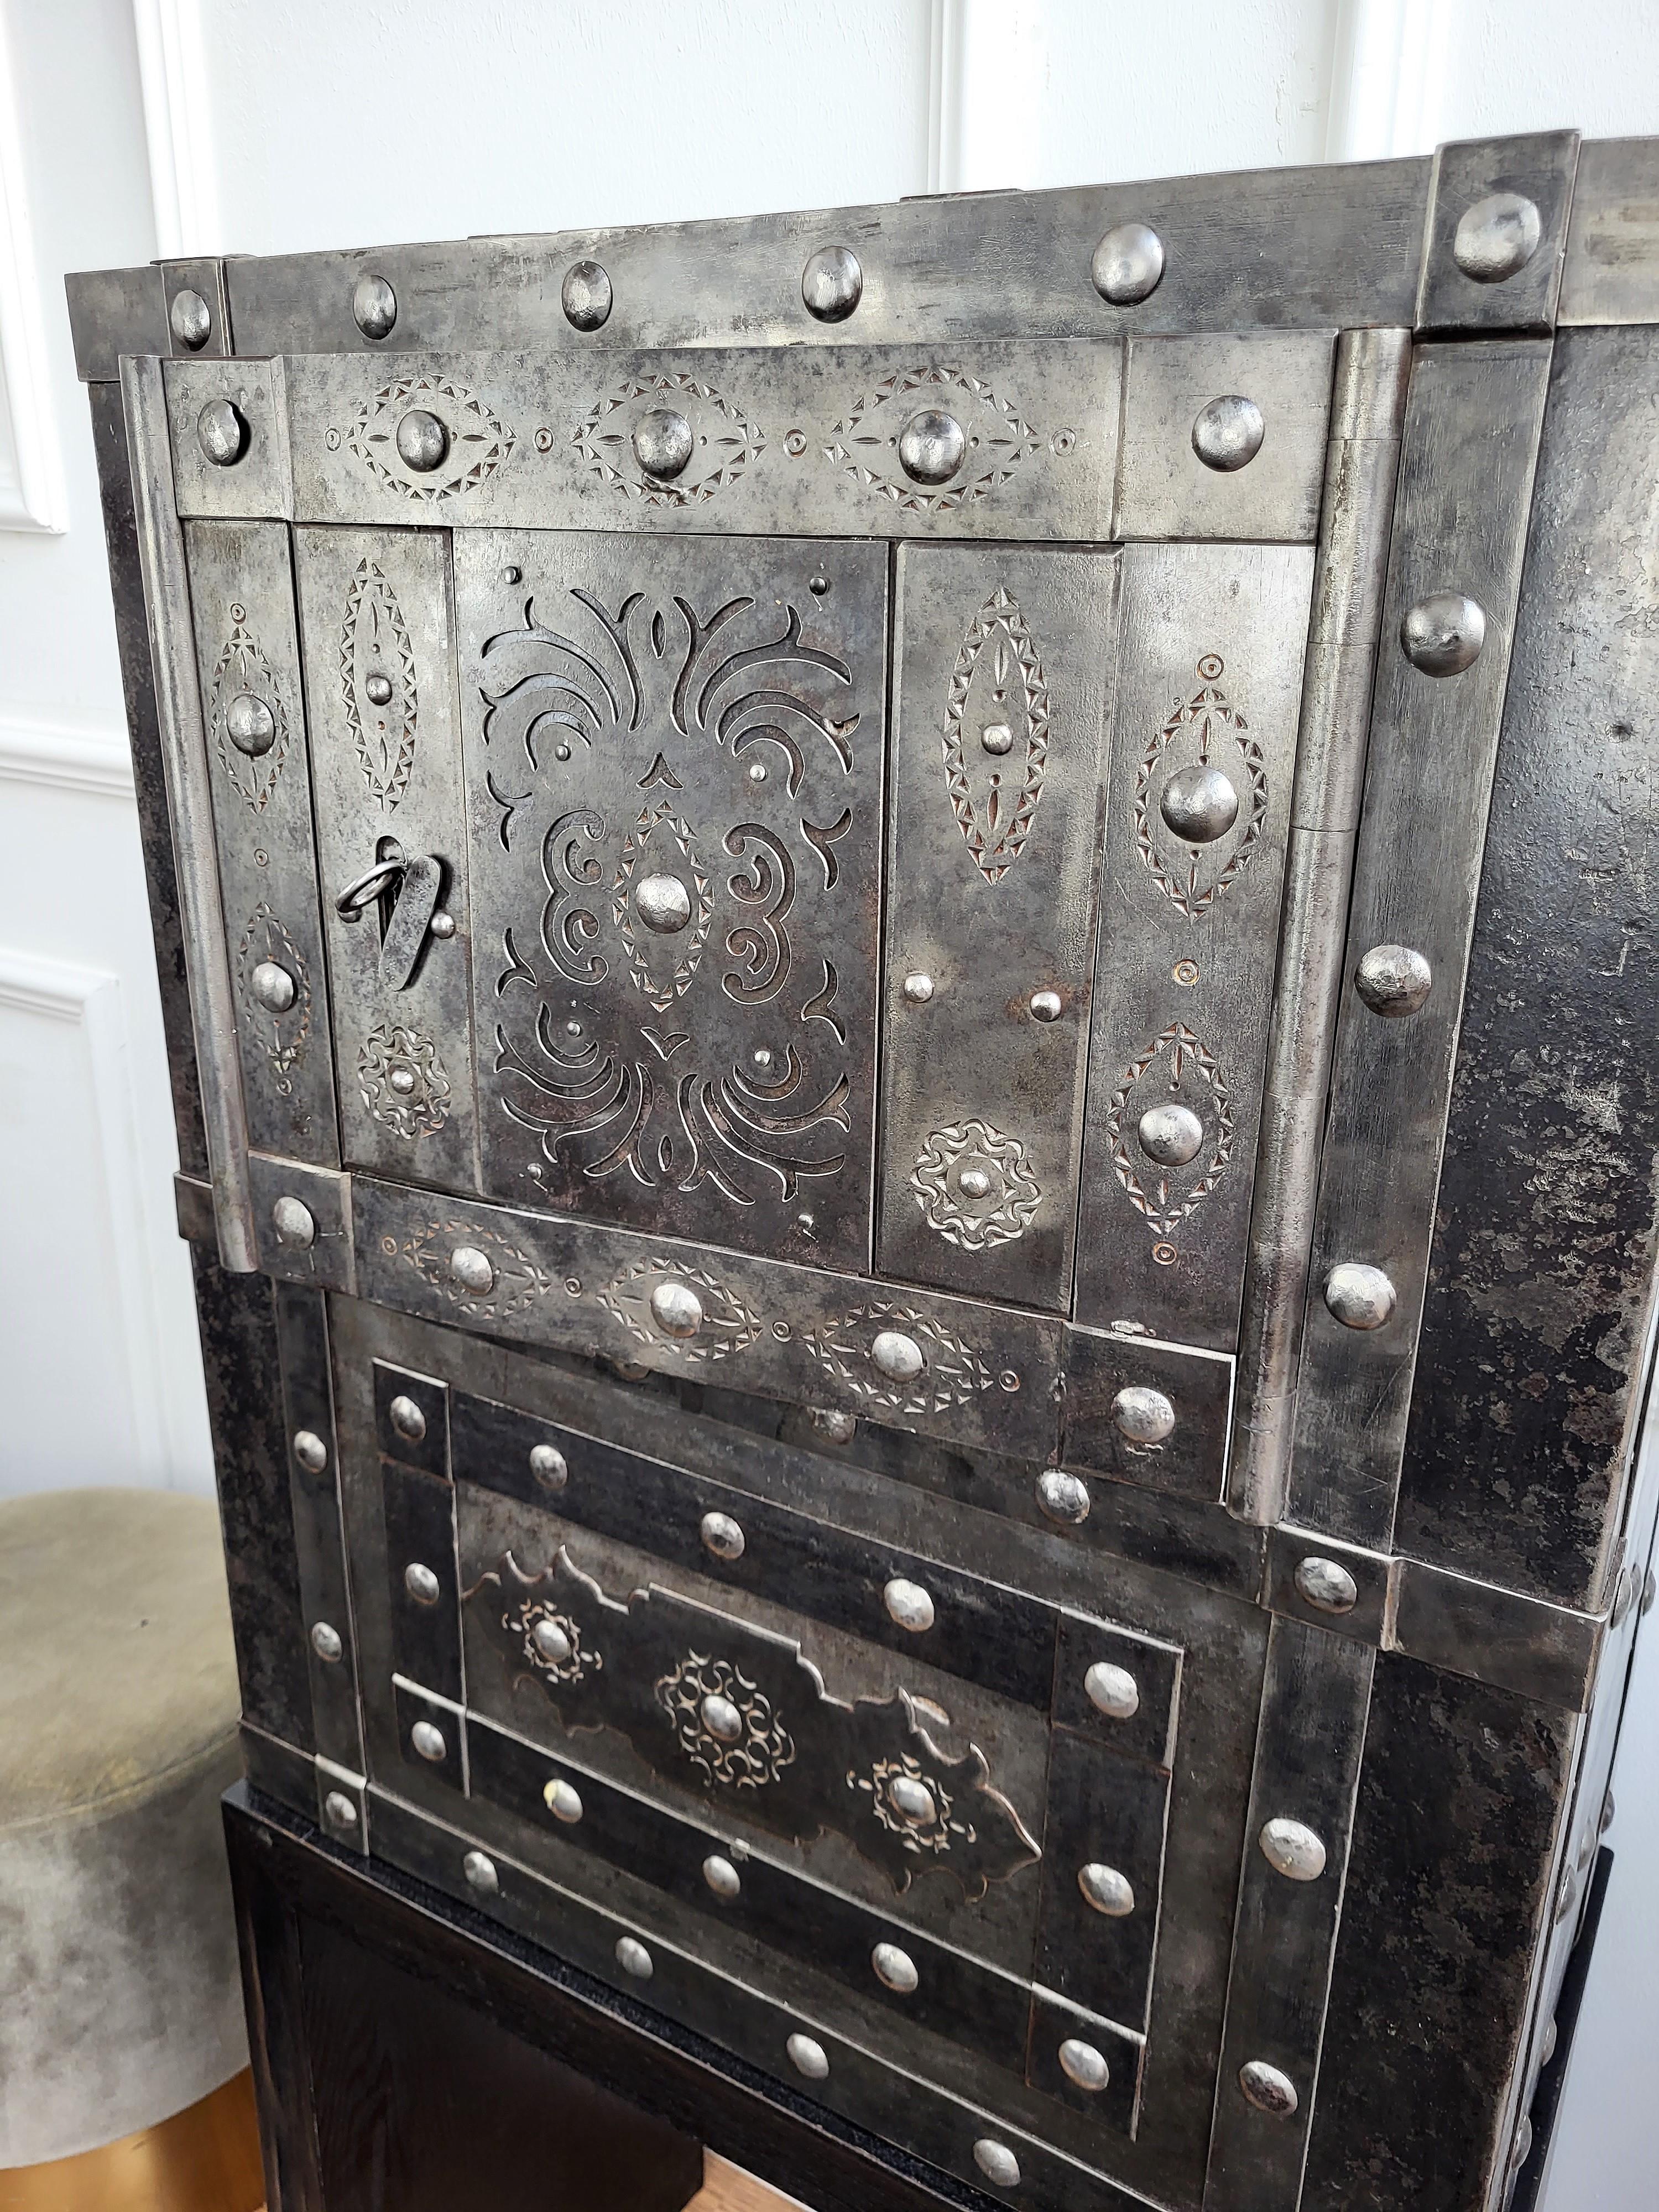 Metal 18th Century Wrought Iron Italian Antique Hobnail Safe Strong Box Bar Cabinet